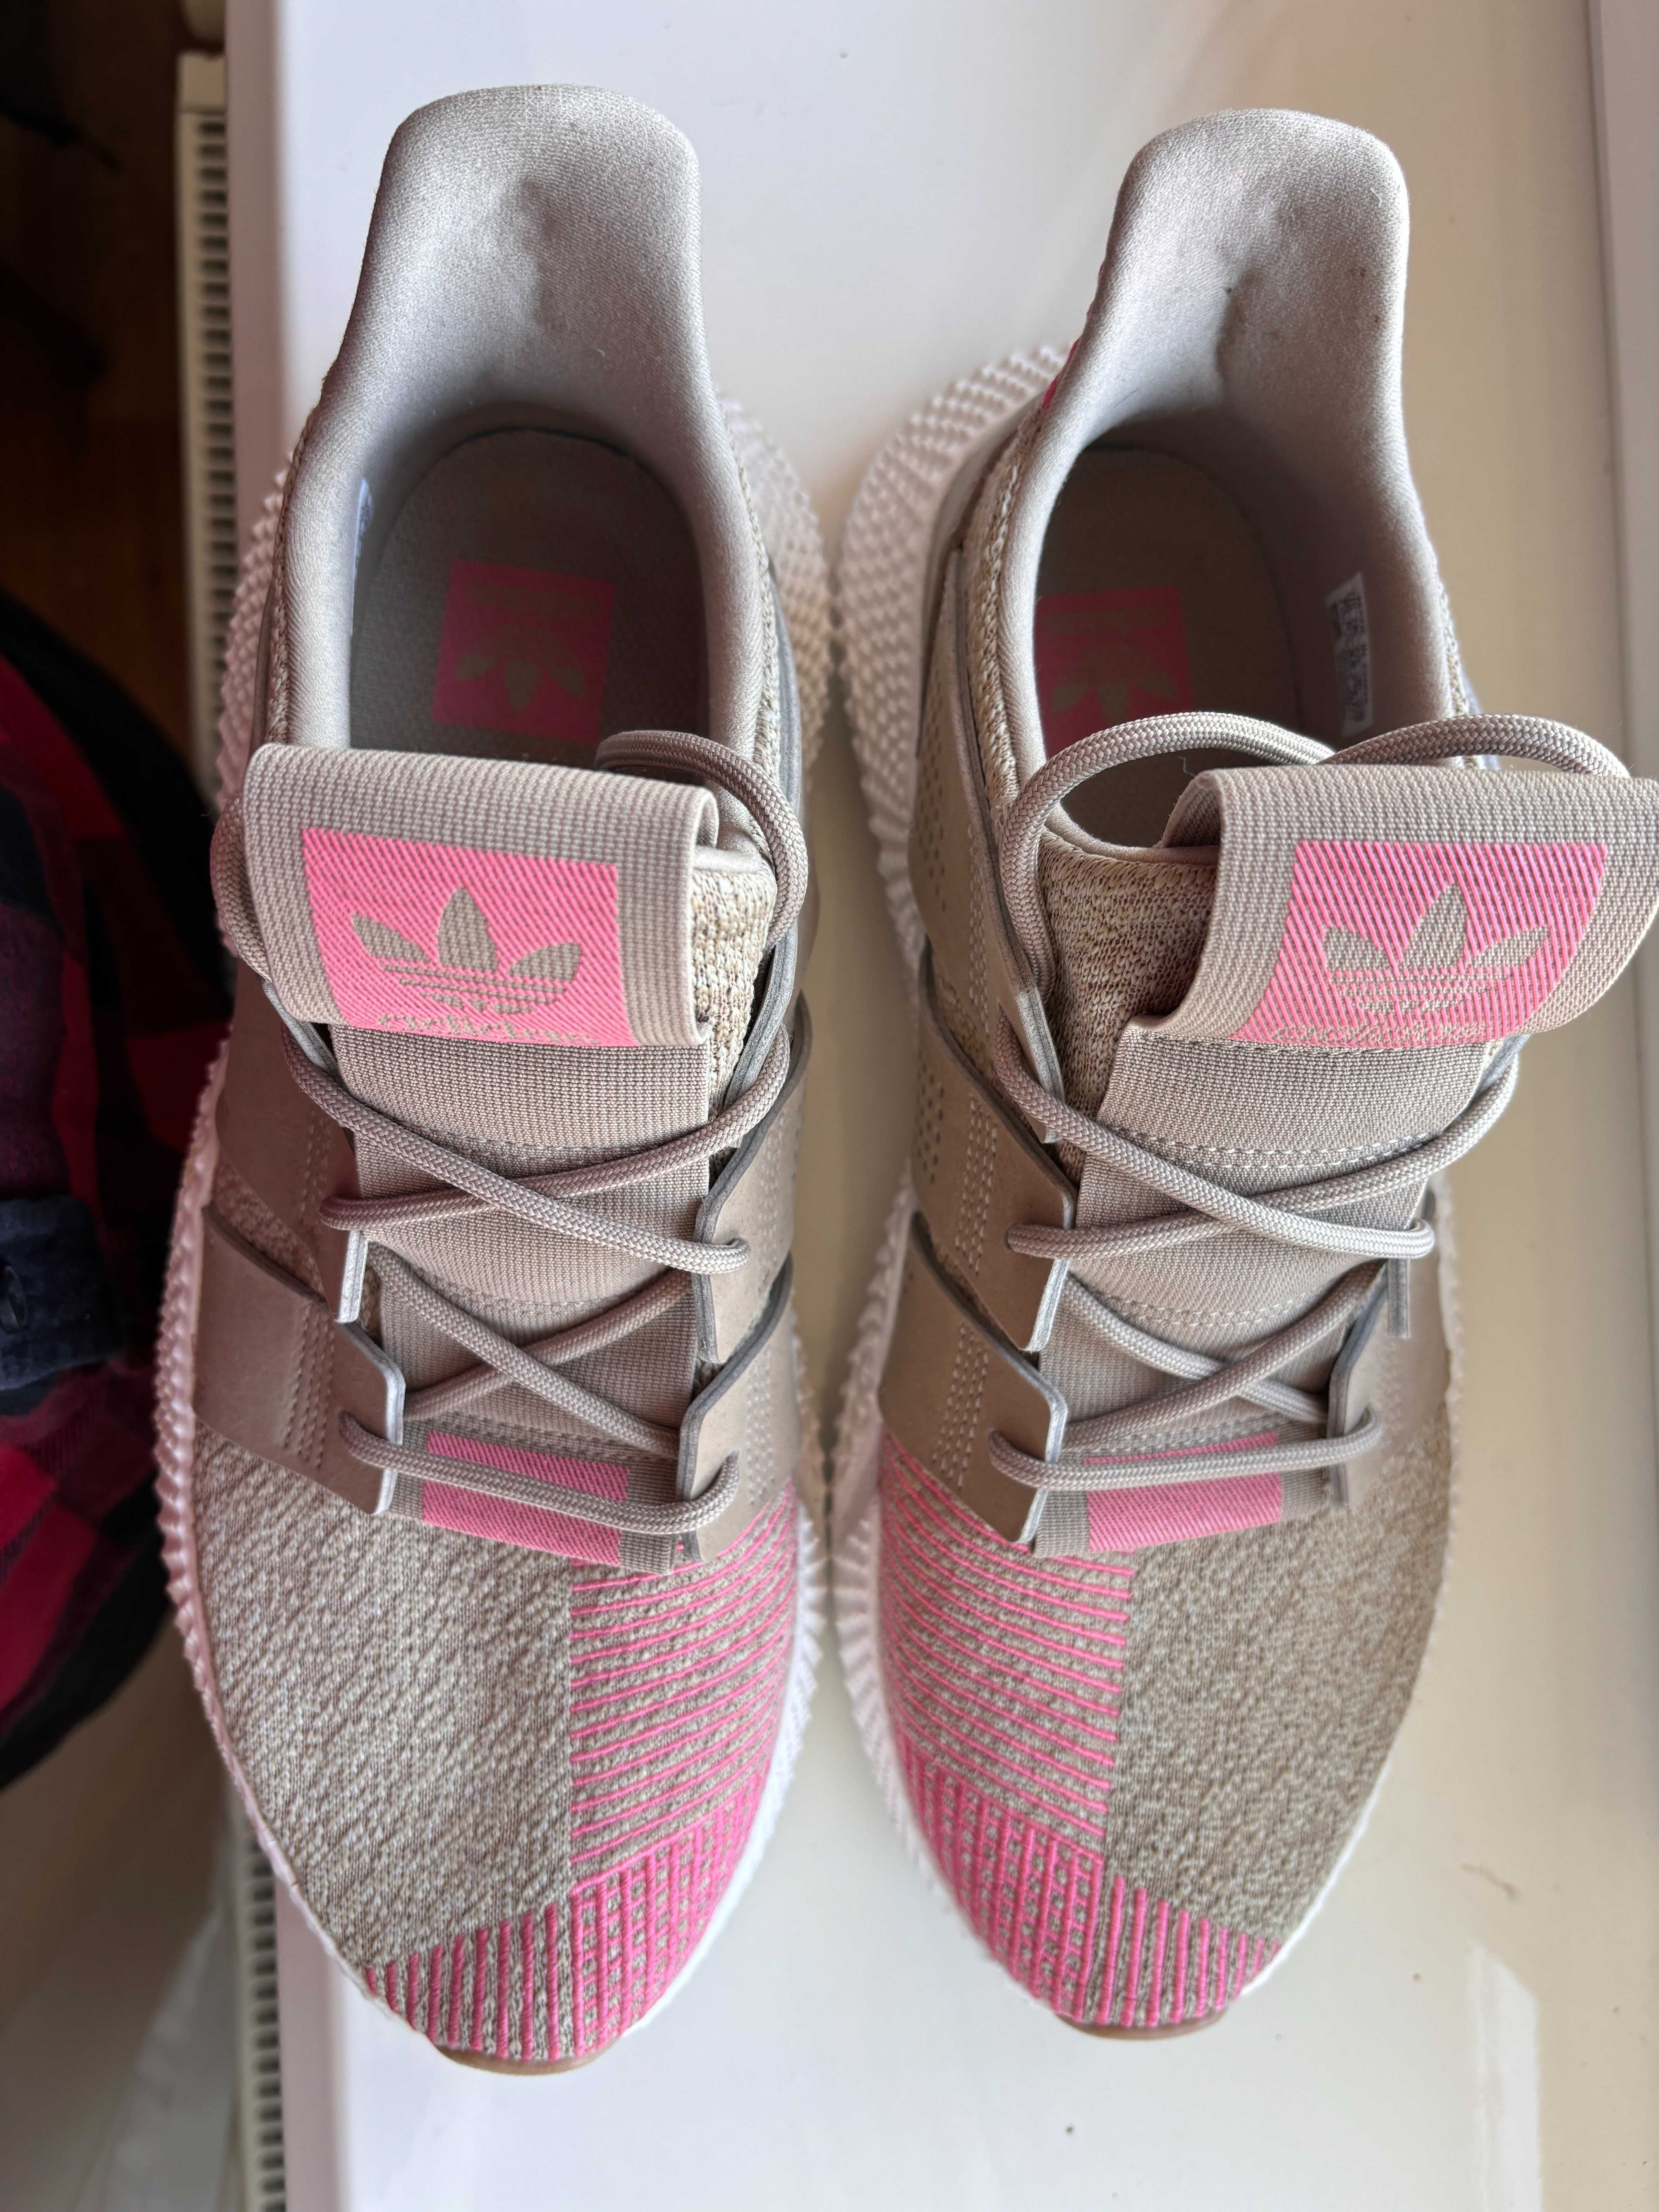 Adidas Original Youth Prophere TRAKHA Shoes Sneaker